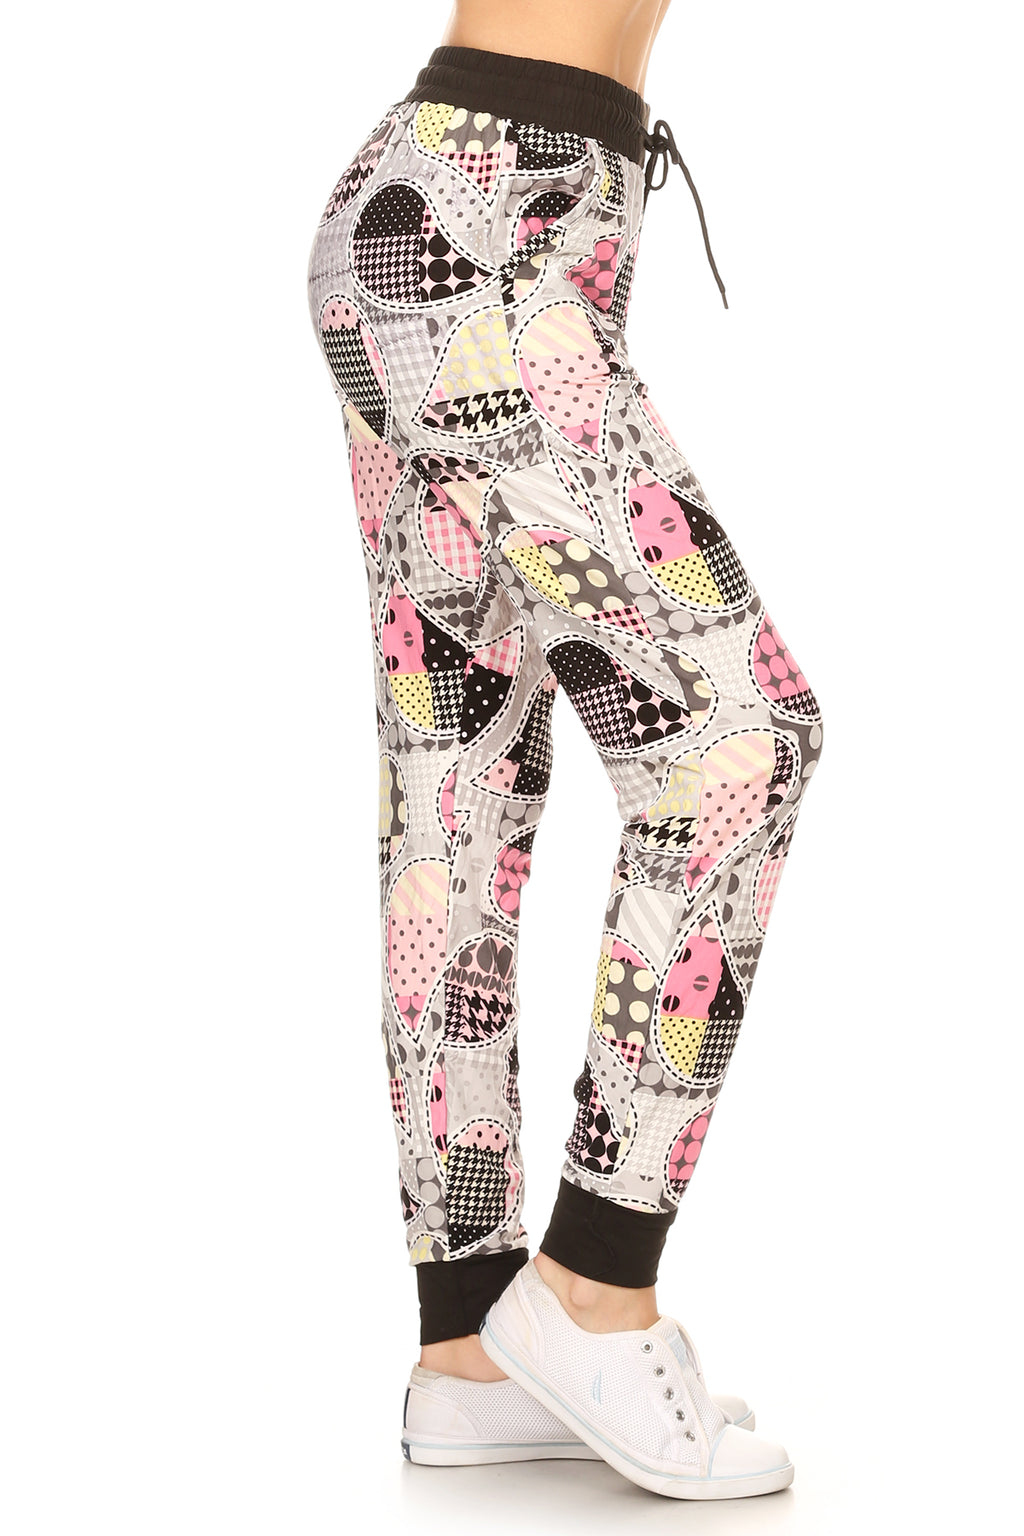 PINK Multi pattern paisley printed joggers with solid trim accent, elastic waist with drawstring, waist pockets and cuffed hem